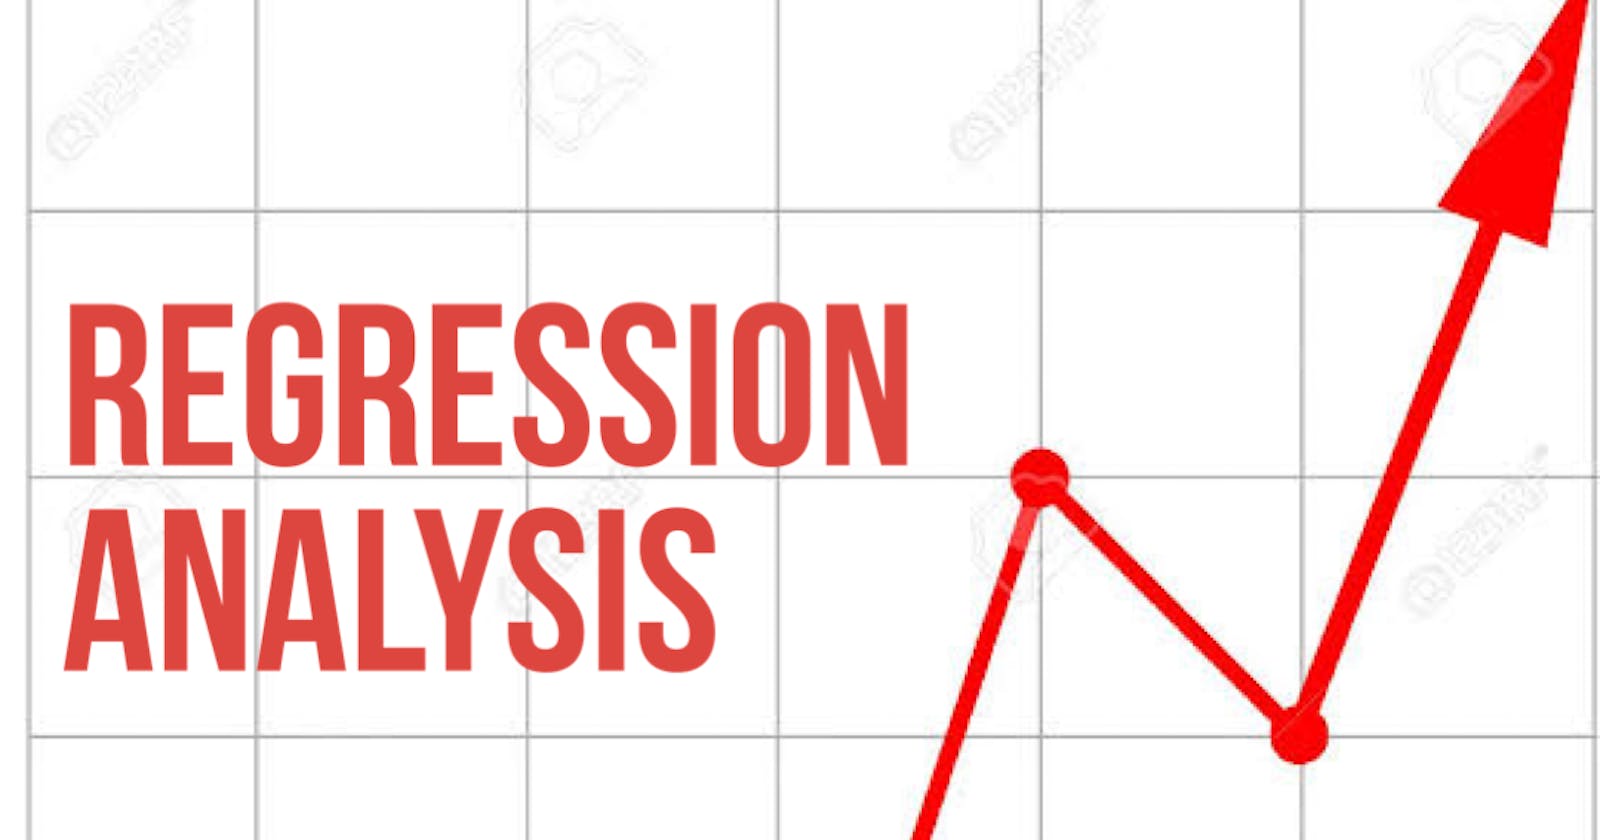 Regression Analysis: Definition, Types and Applications